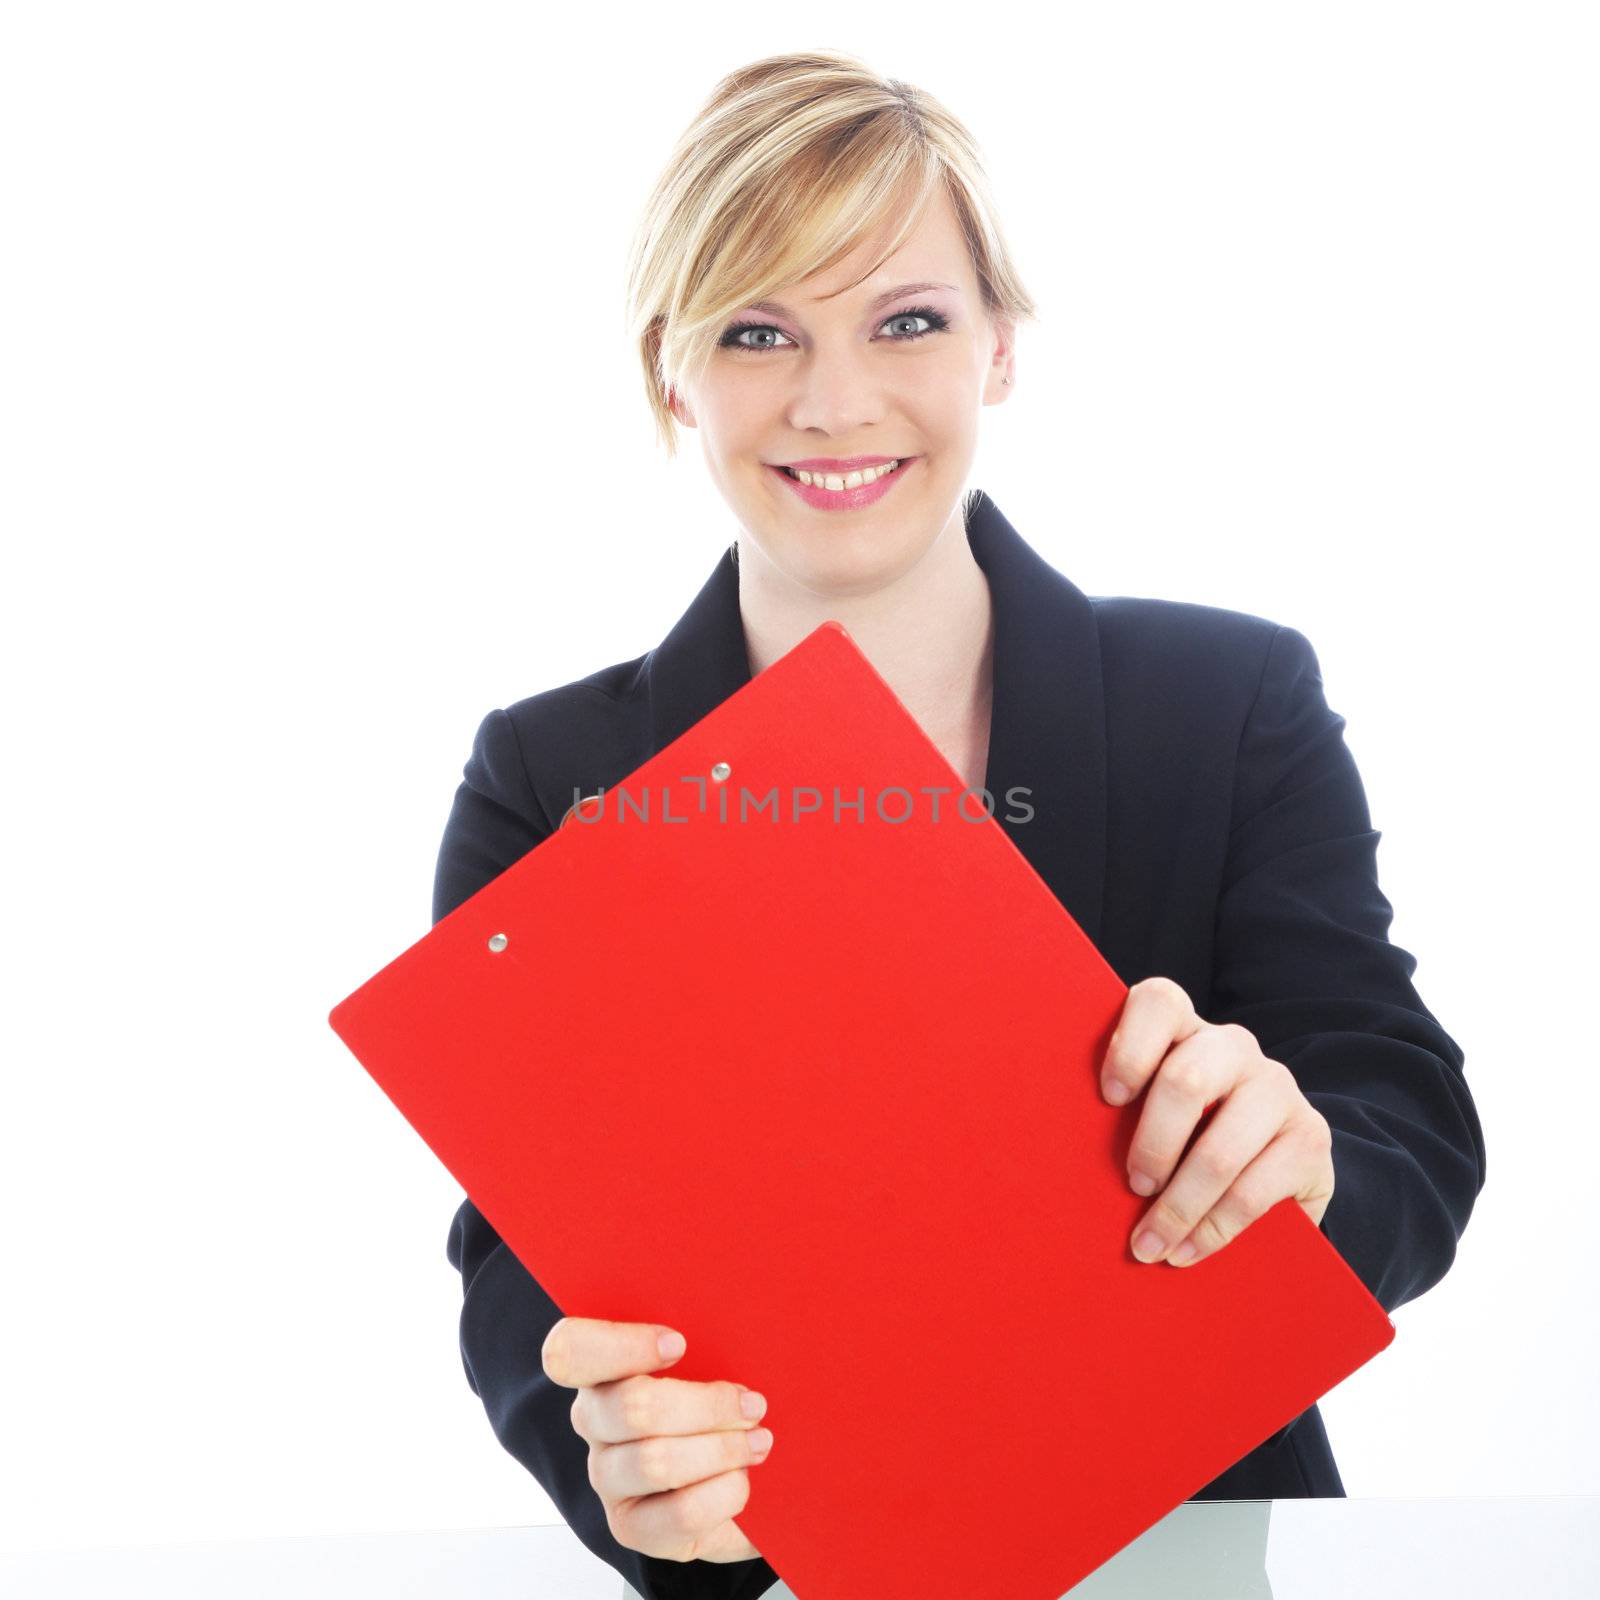 Efficient businesswoman with red clipboard by Farina6000